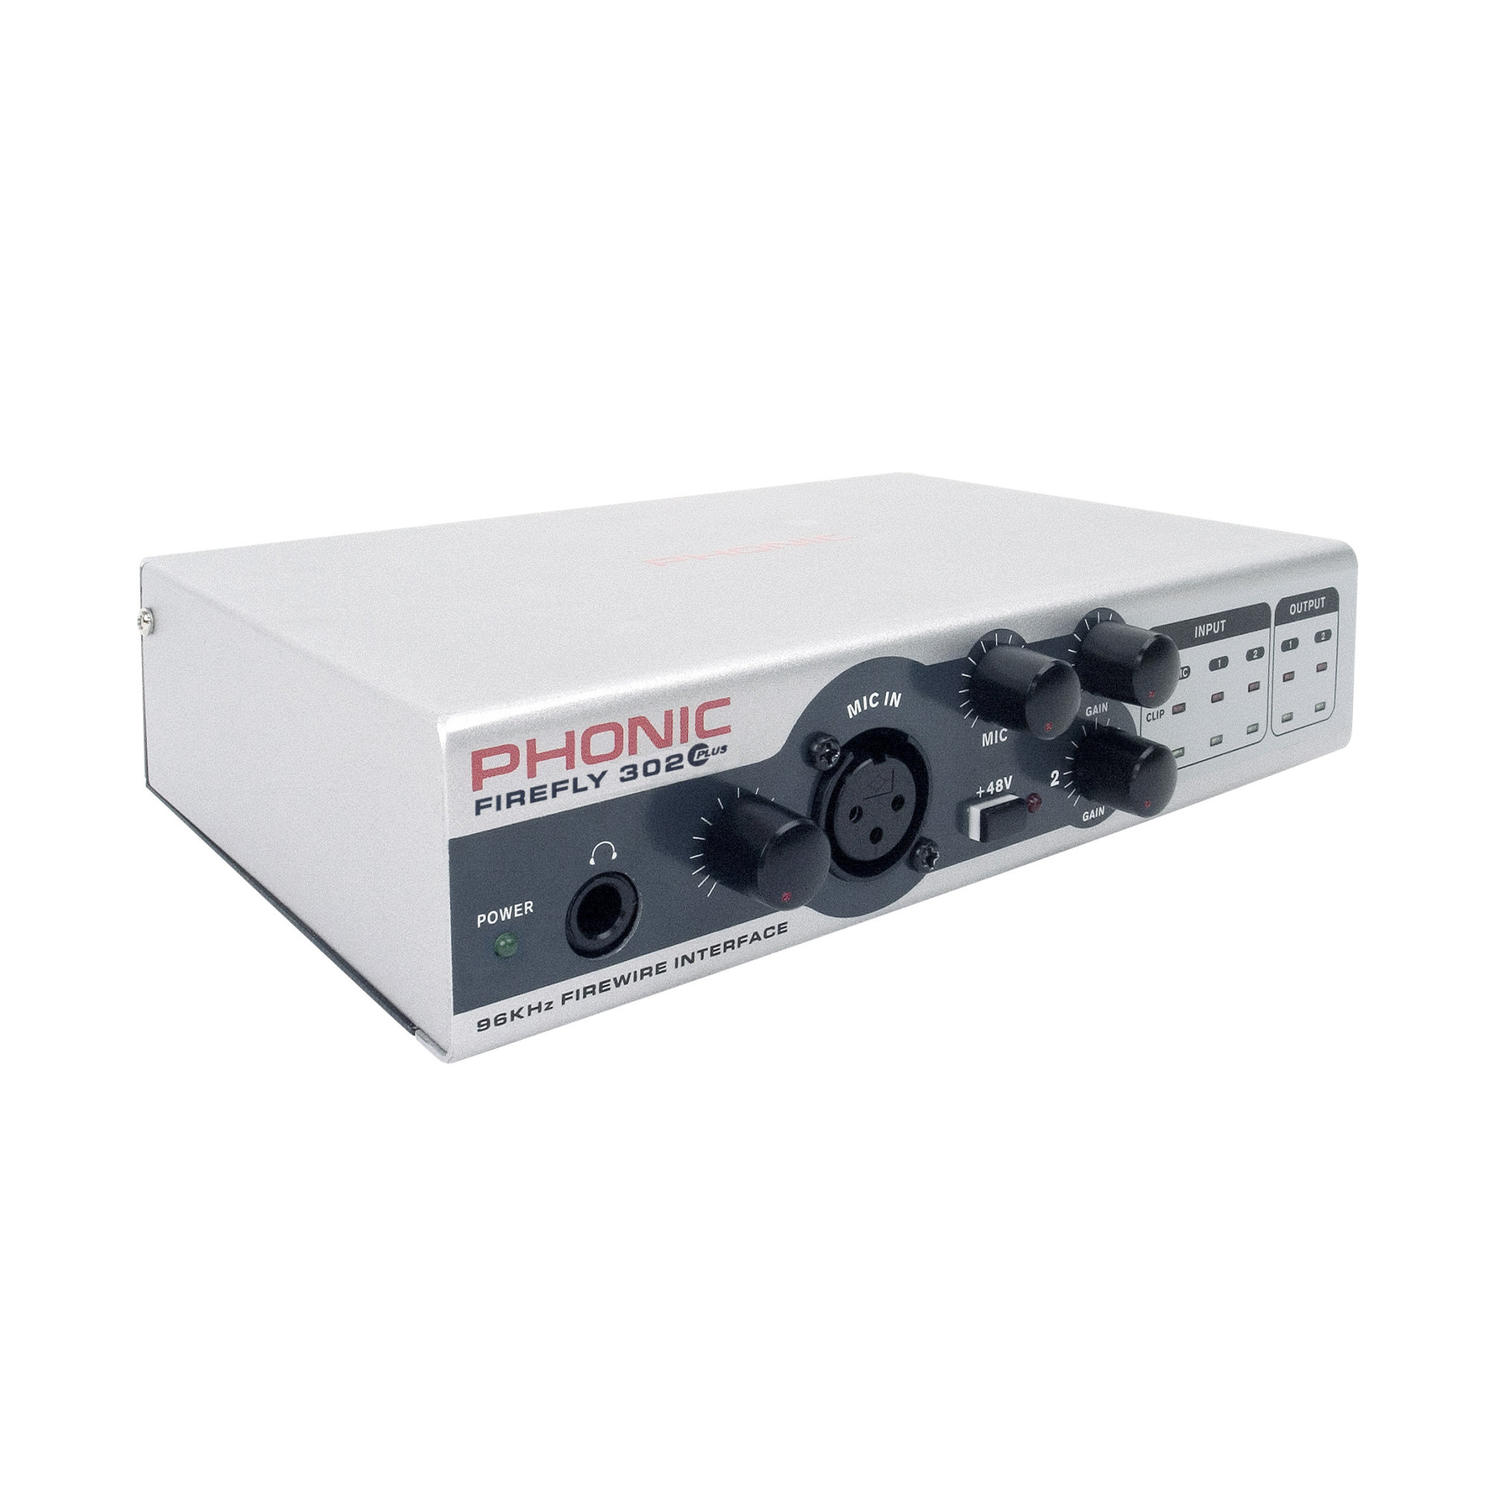 phonic firefly 302 driver